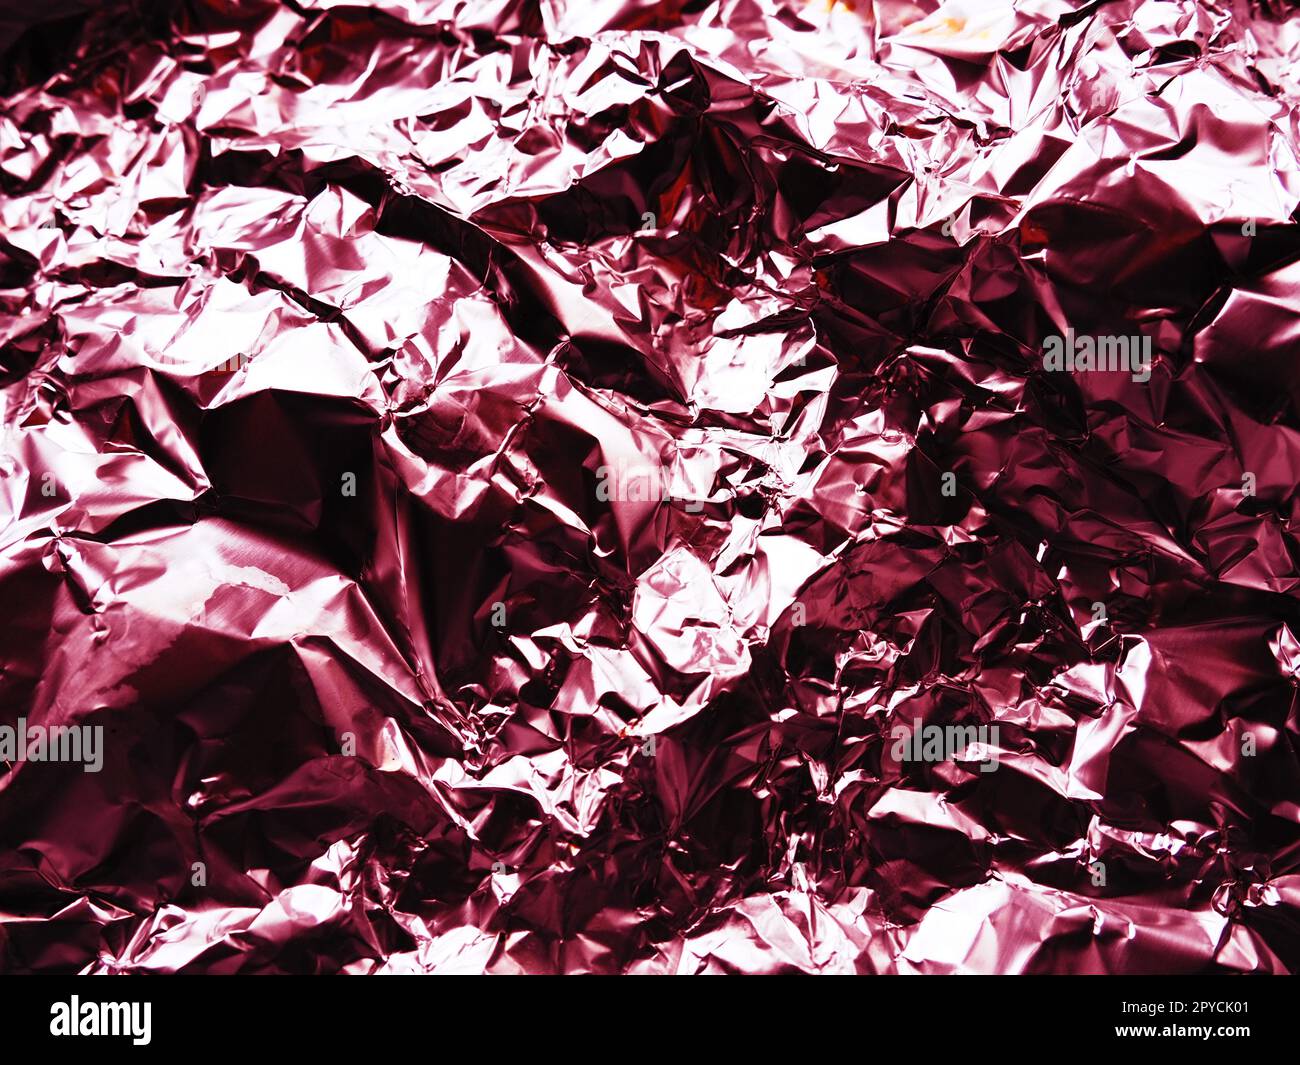 https://c8.alamy.com/comp/2PYCK01/foil-close-up-aluminum-silver-crumpled-foil-abstract-metallic-background-foil-for-baking-food-background-with-a-red-or-burgundy-tint-2PYCK01.jpg